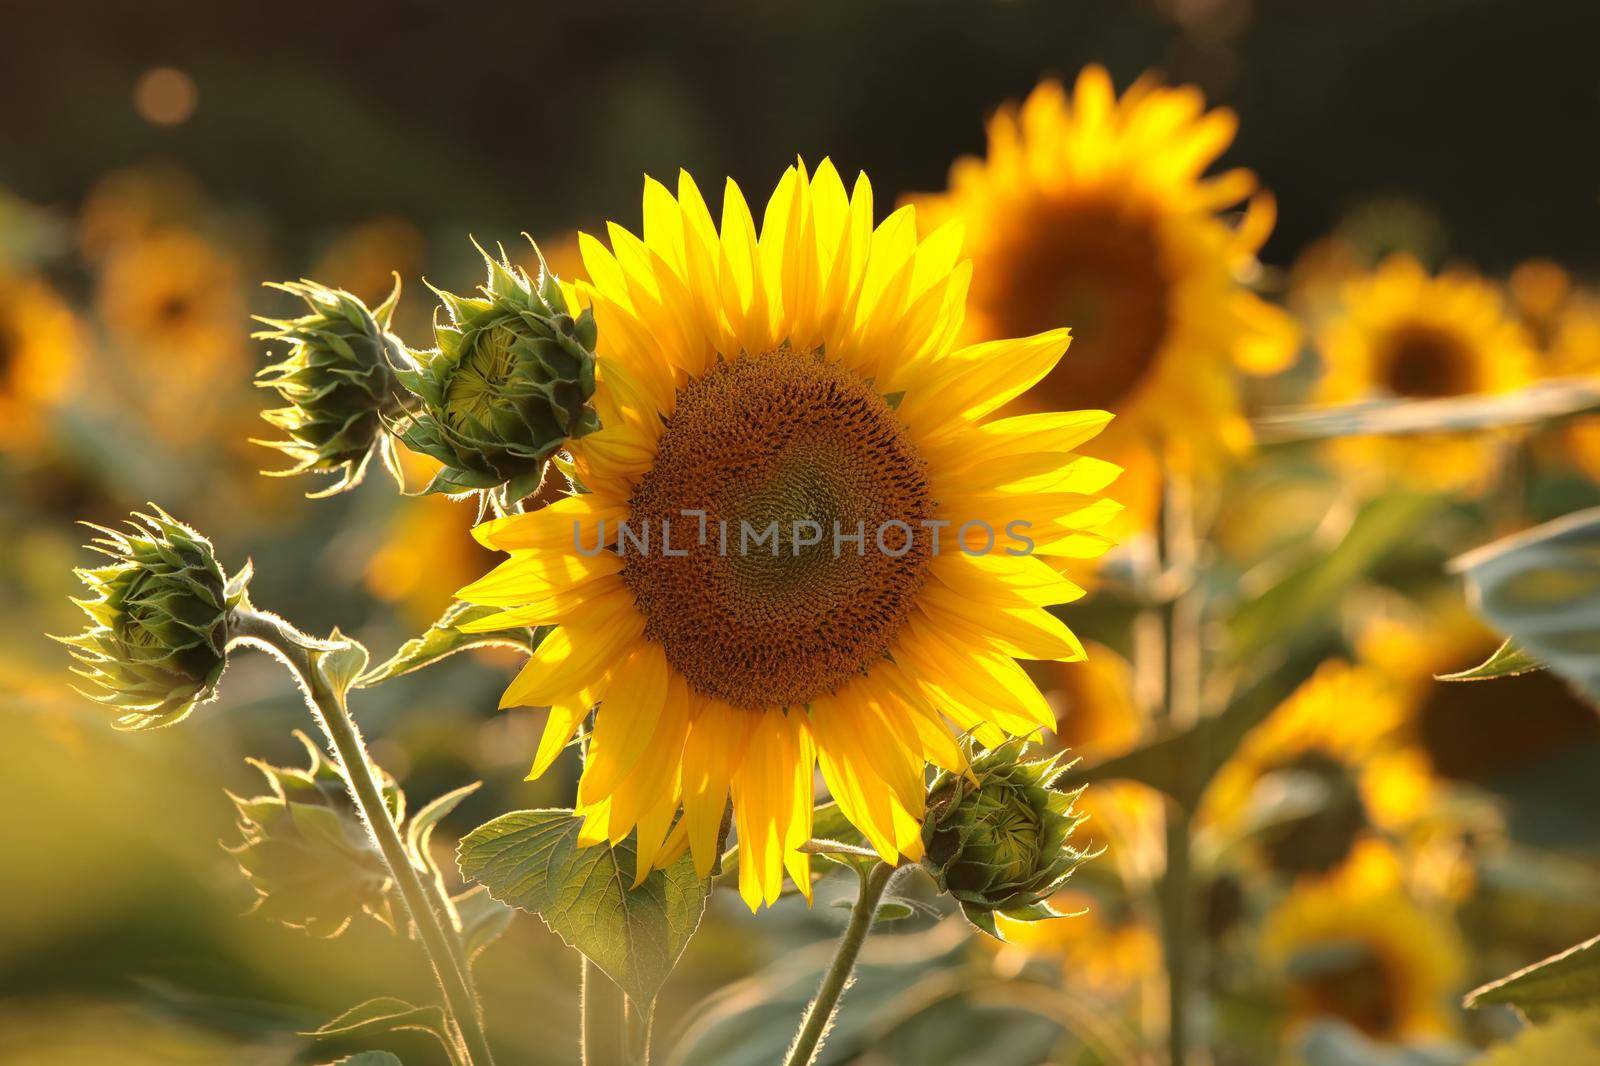 Sunflower - Helianthus annuus in the field at dusk.